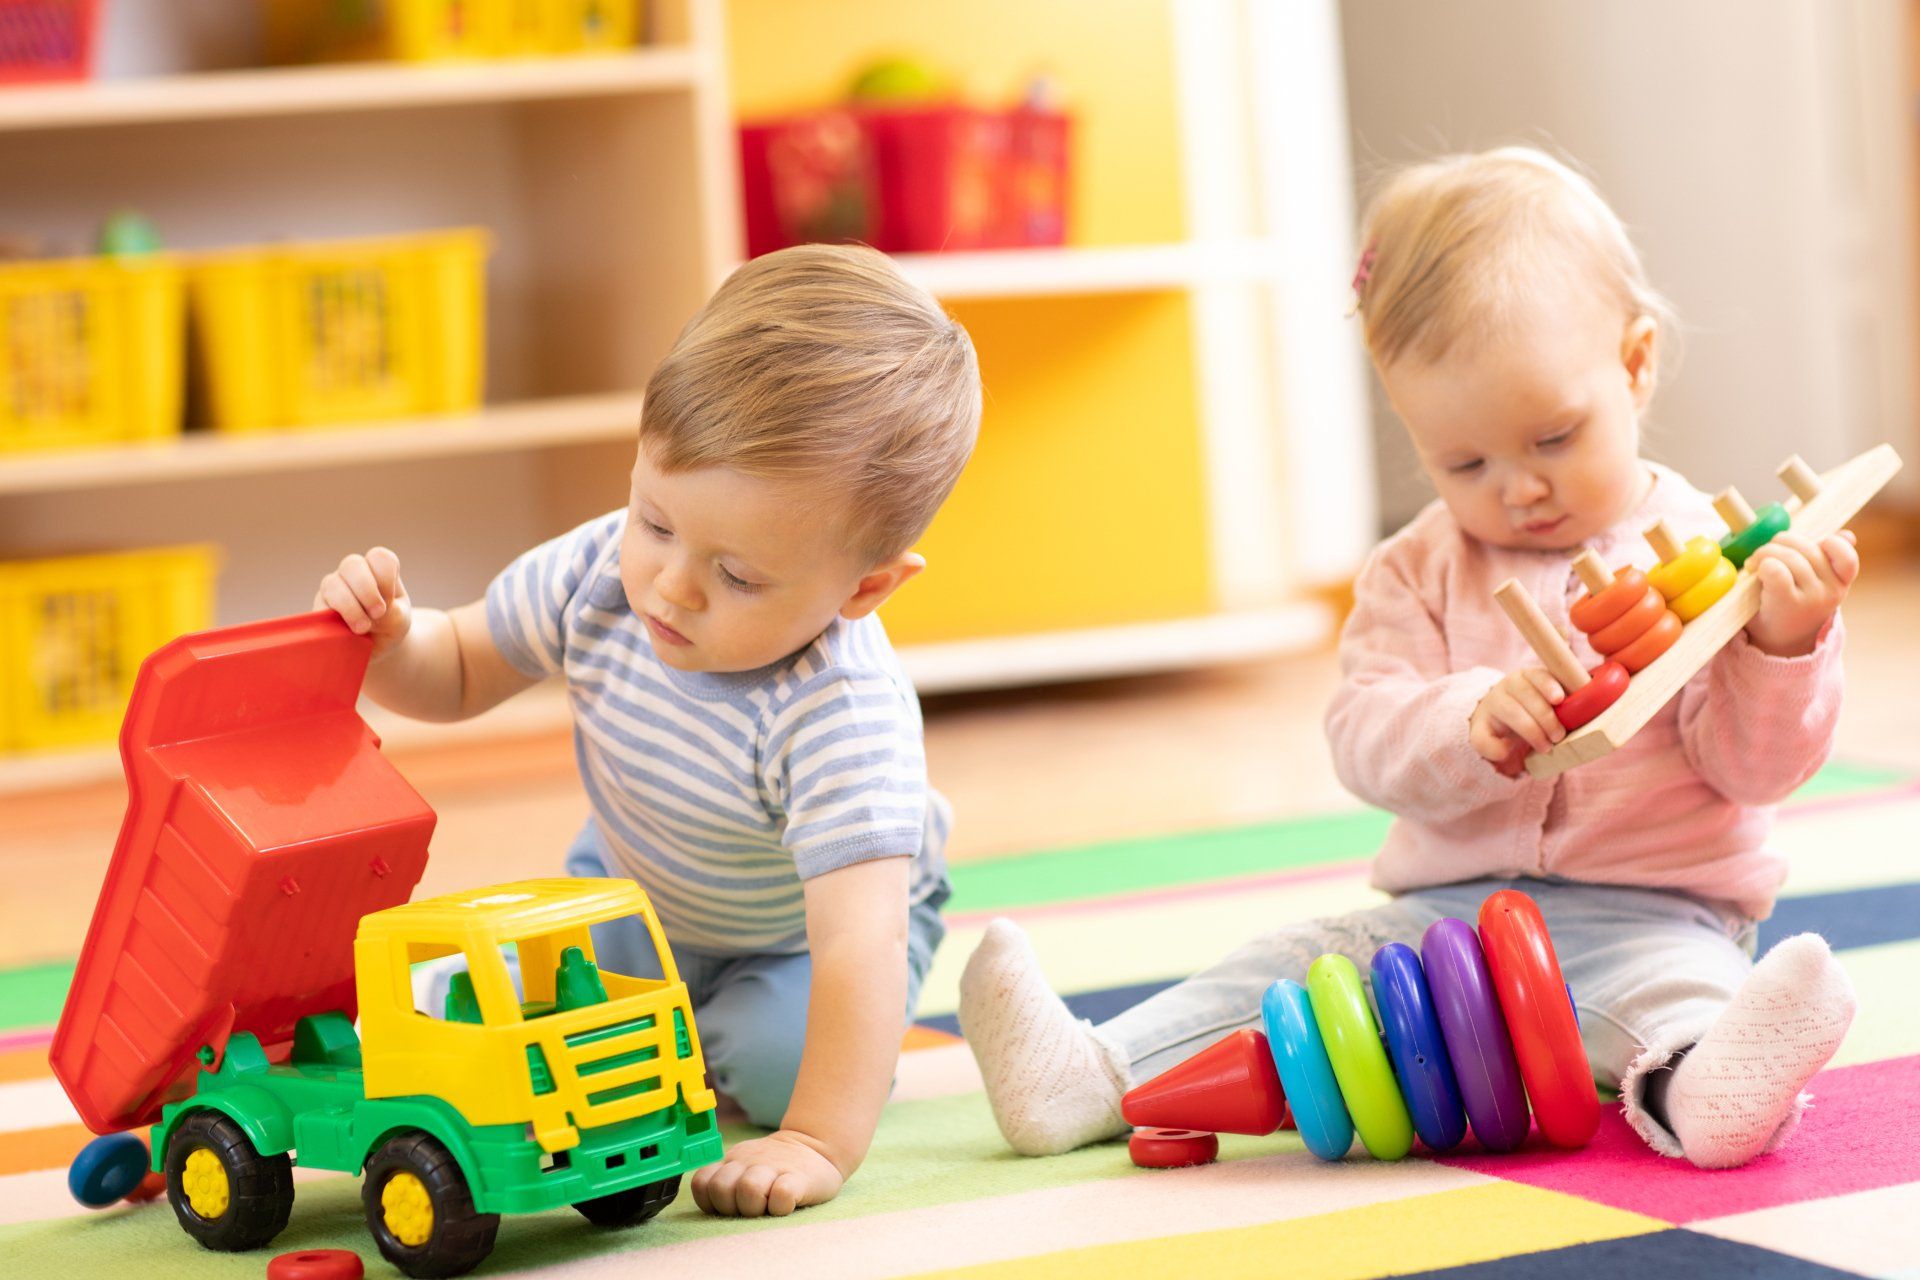 Preschool boy and girl playing on floor with educational toys